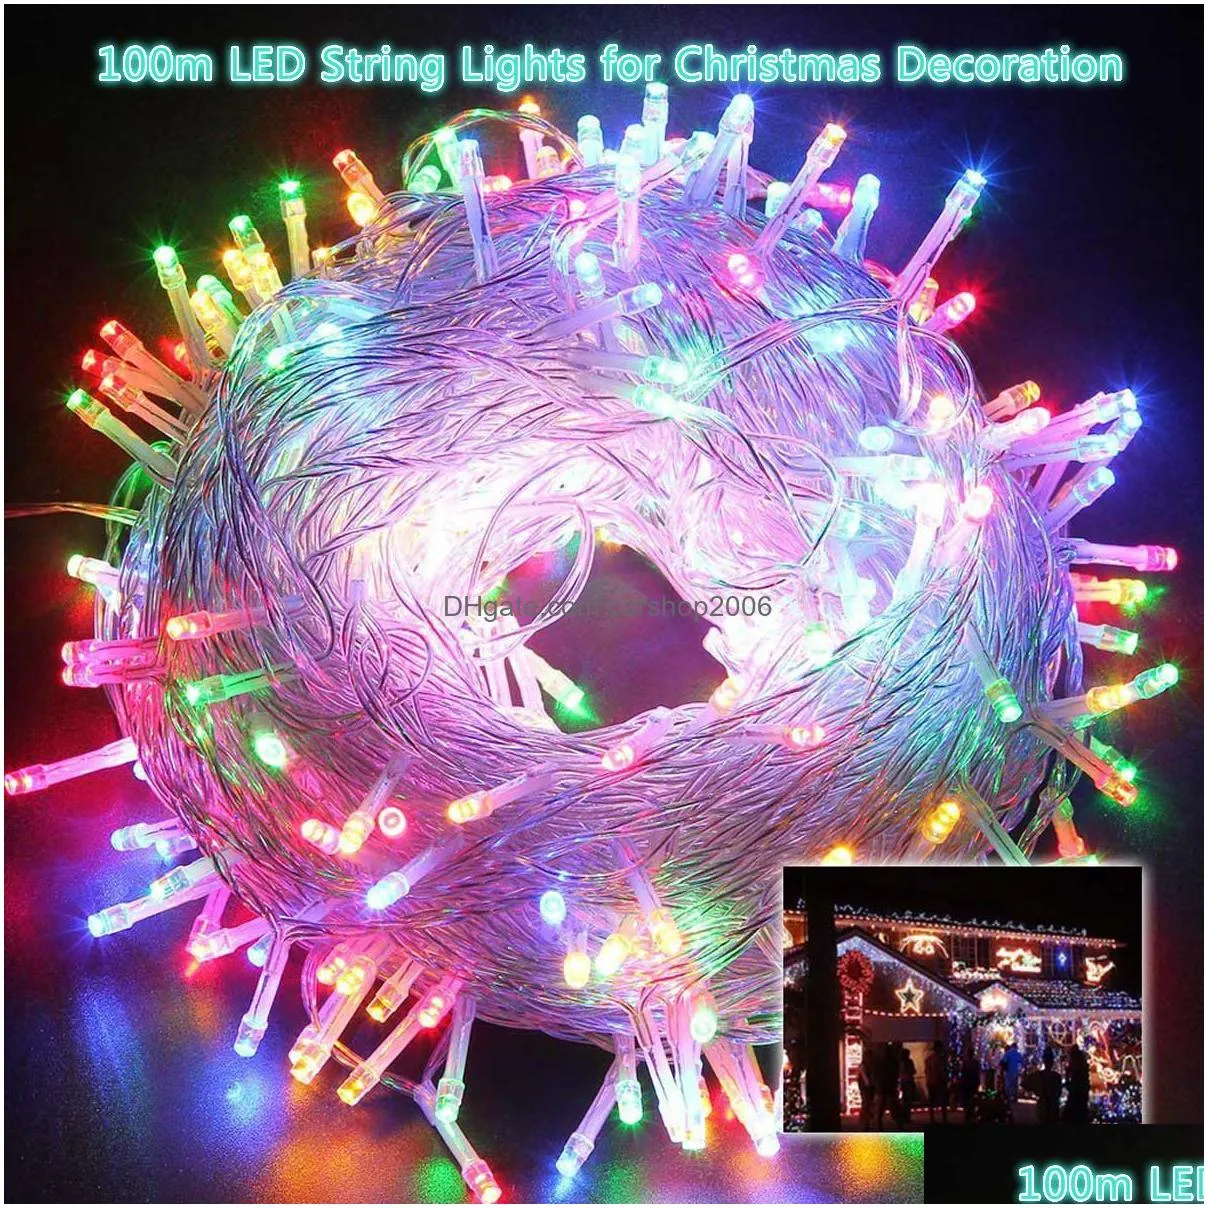 10m 100leds led string light ac220v ac110v 9 colors festoon lamps waterproof outdoor garland party holiday christmas decoration